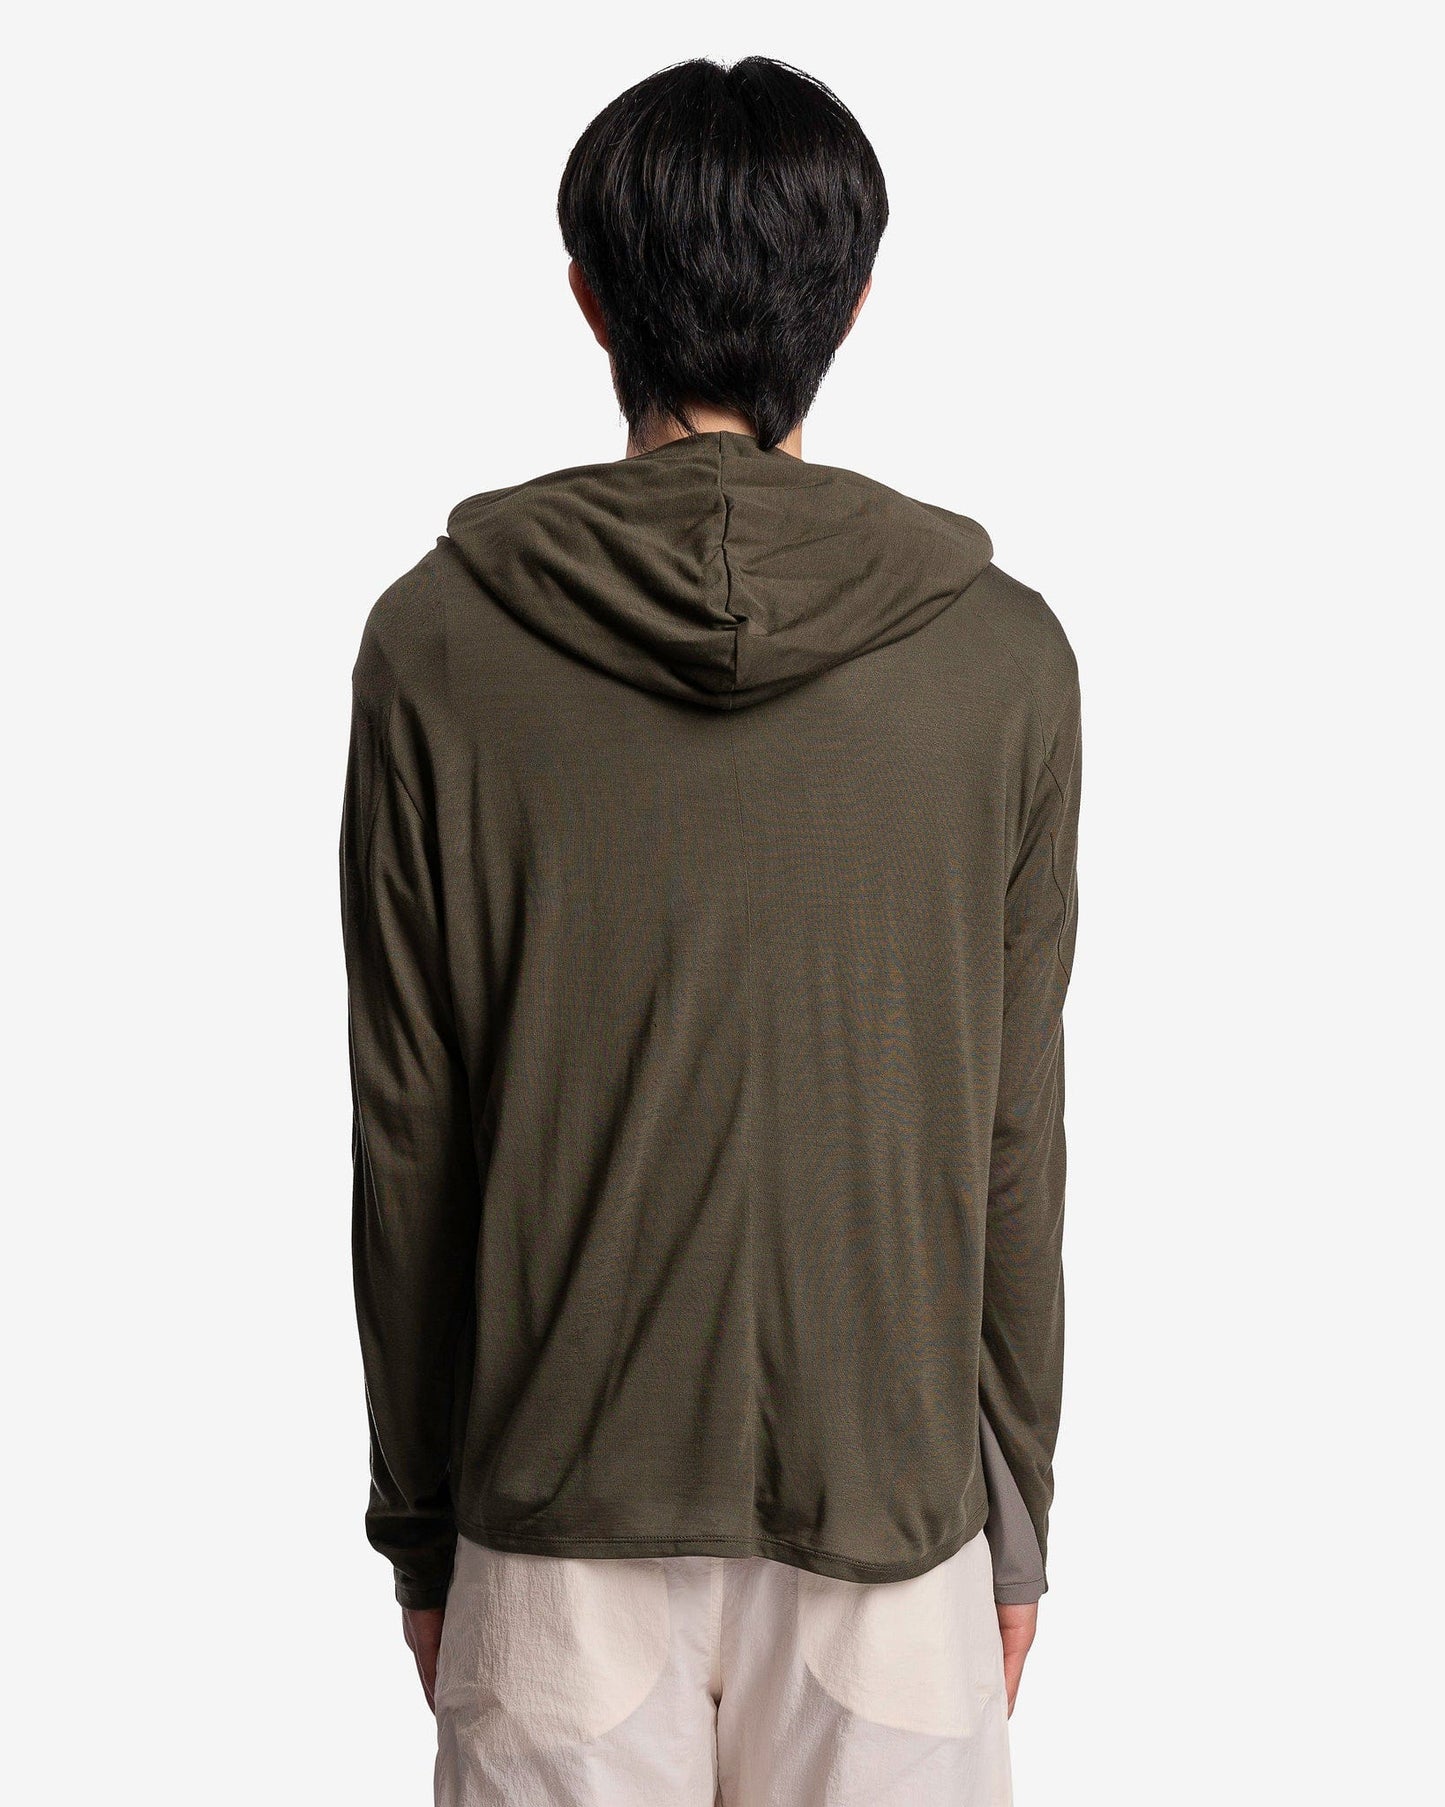 POST ARCHIVE FACTION (P.A.F) Men's Sweatshirts Hoodie Right in Olive Green